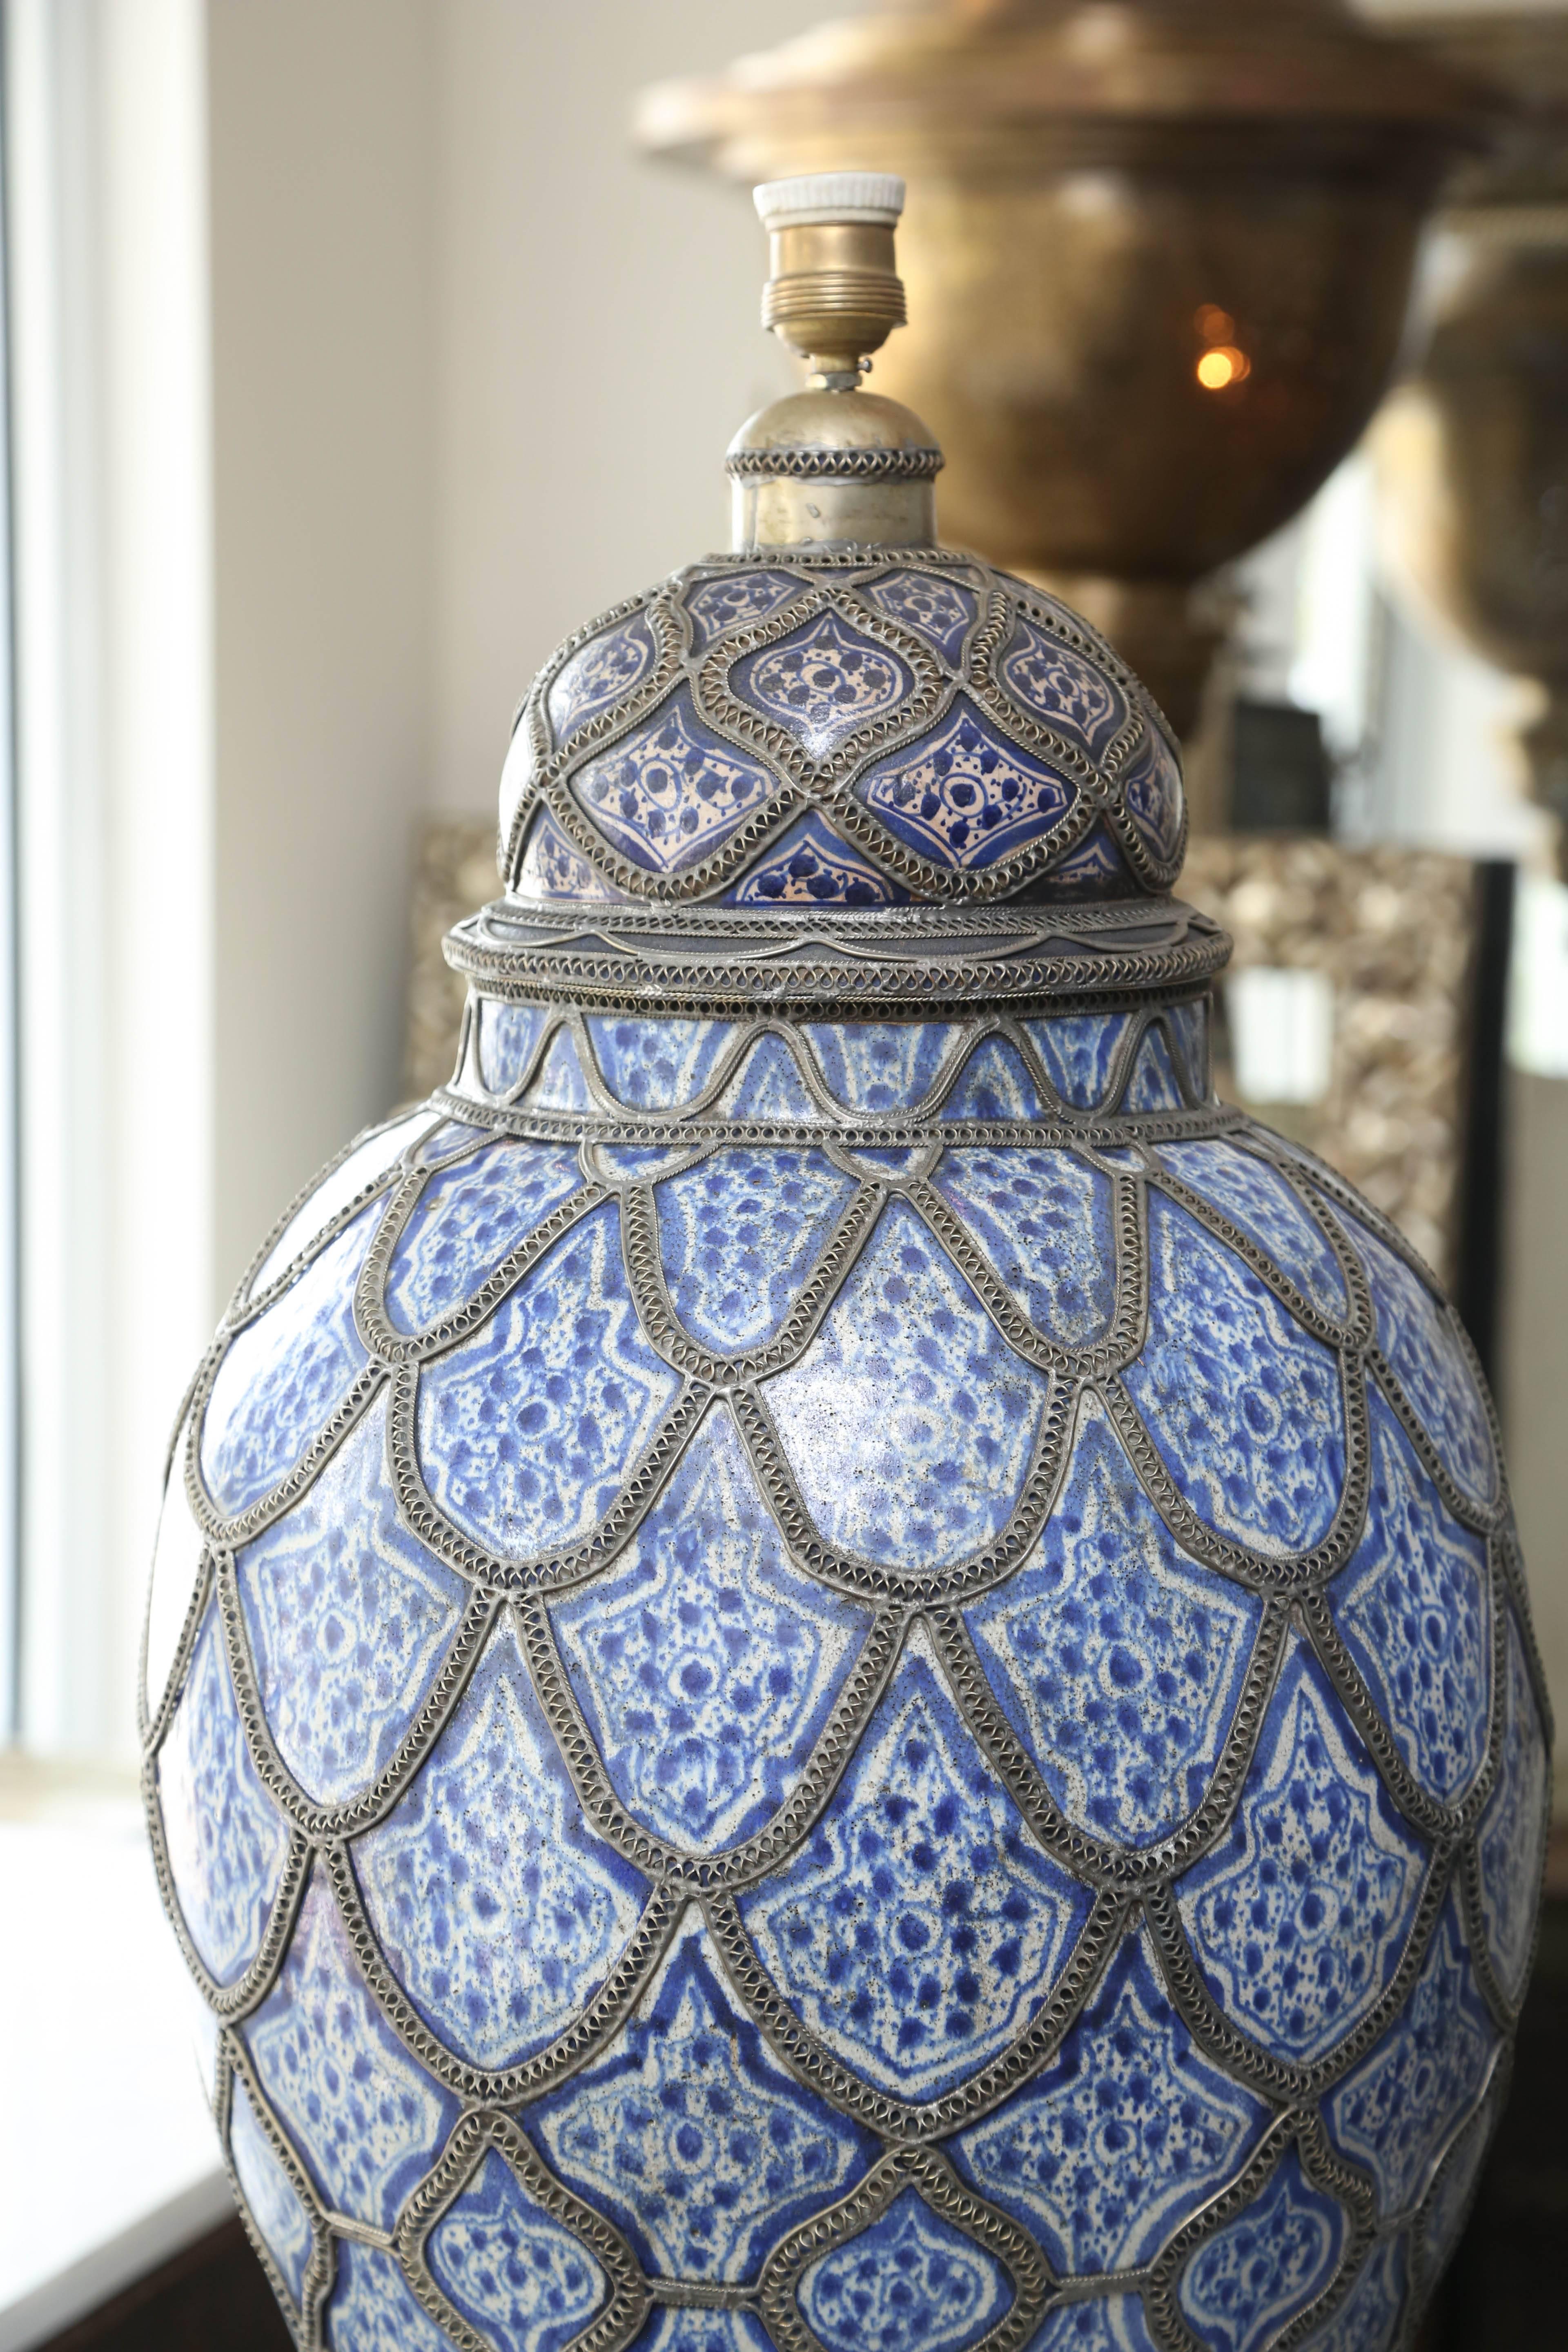 This impressive pair of glazed Fez ceramic ginger jars are crafted in the traditional Moroccan custom and adorned with silver nickel filigree work. They have been converted to 240 volt lamps, and need to be rewired to 120 volts.
Measures: 35